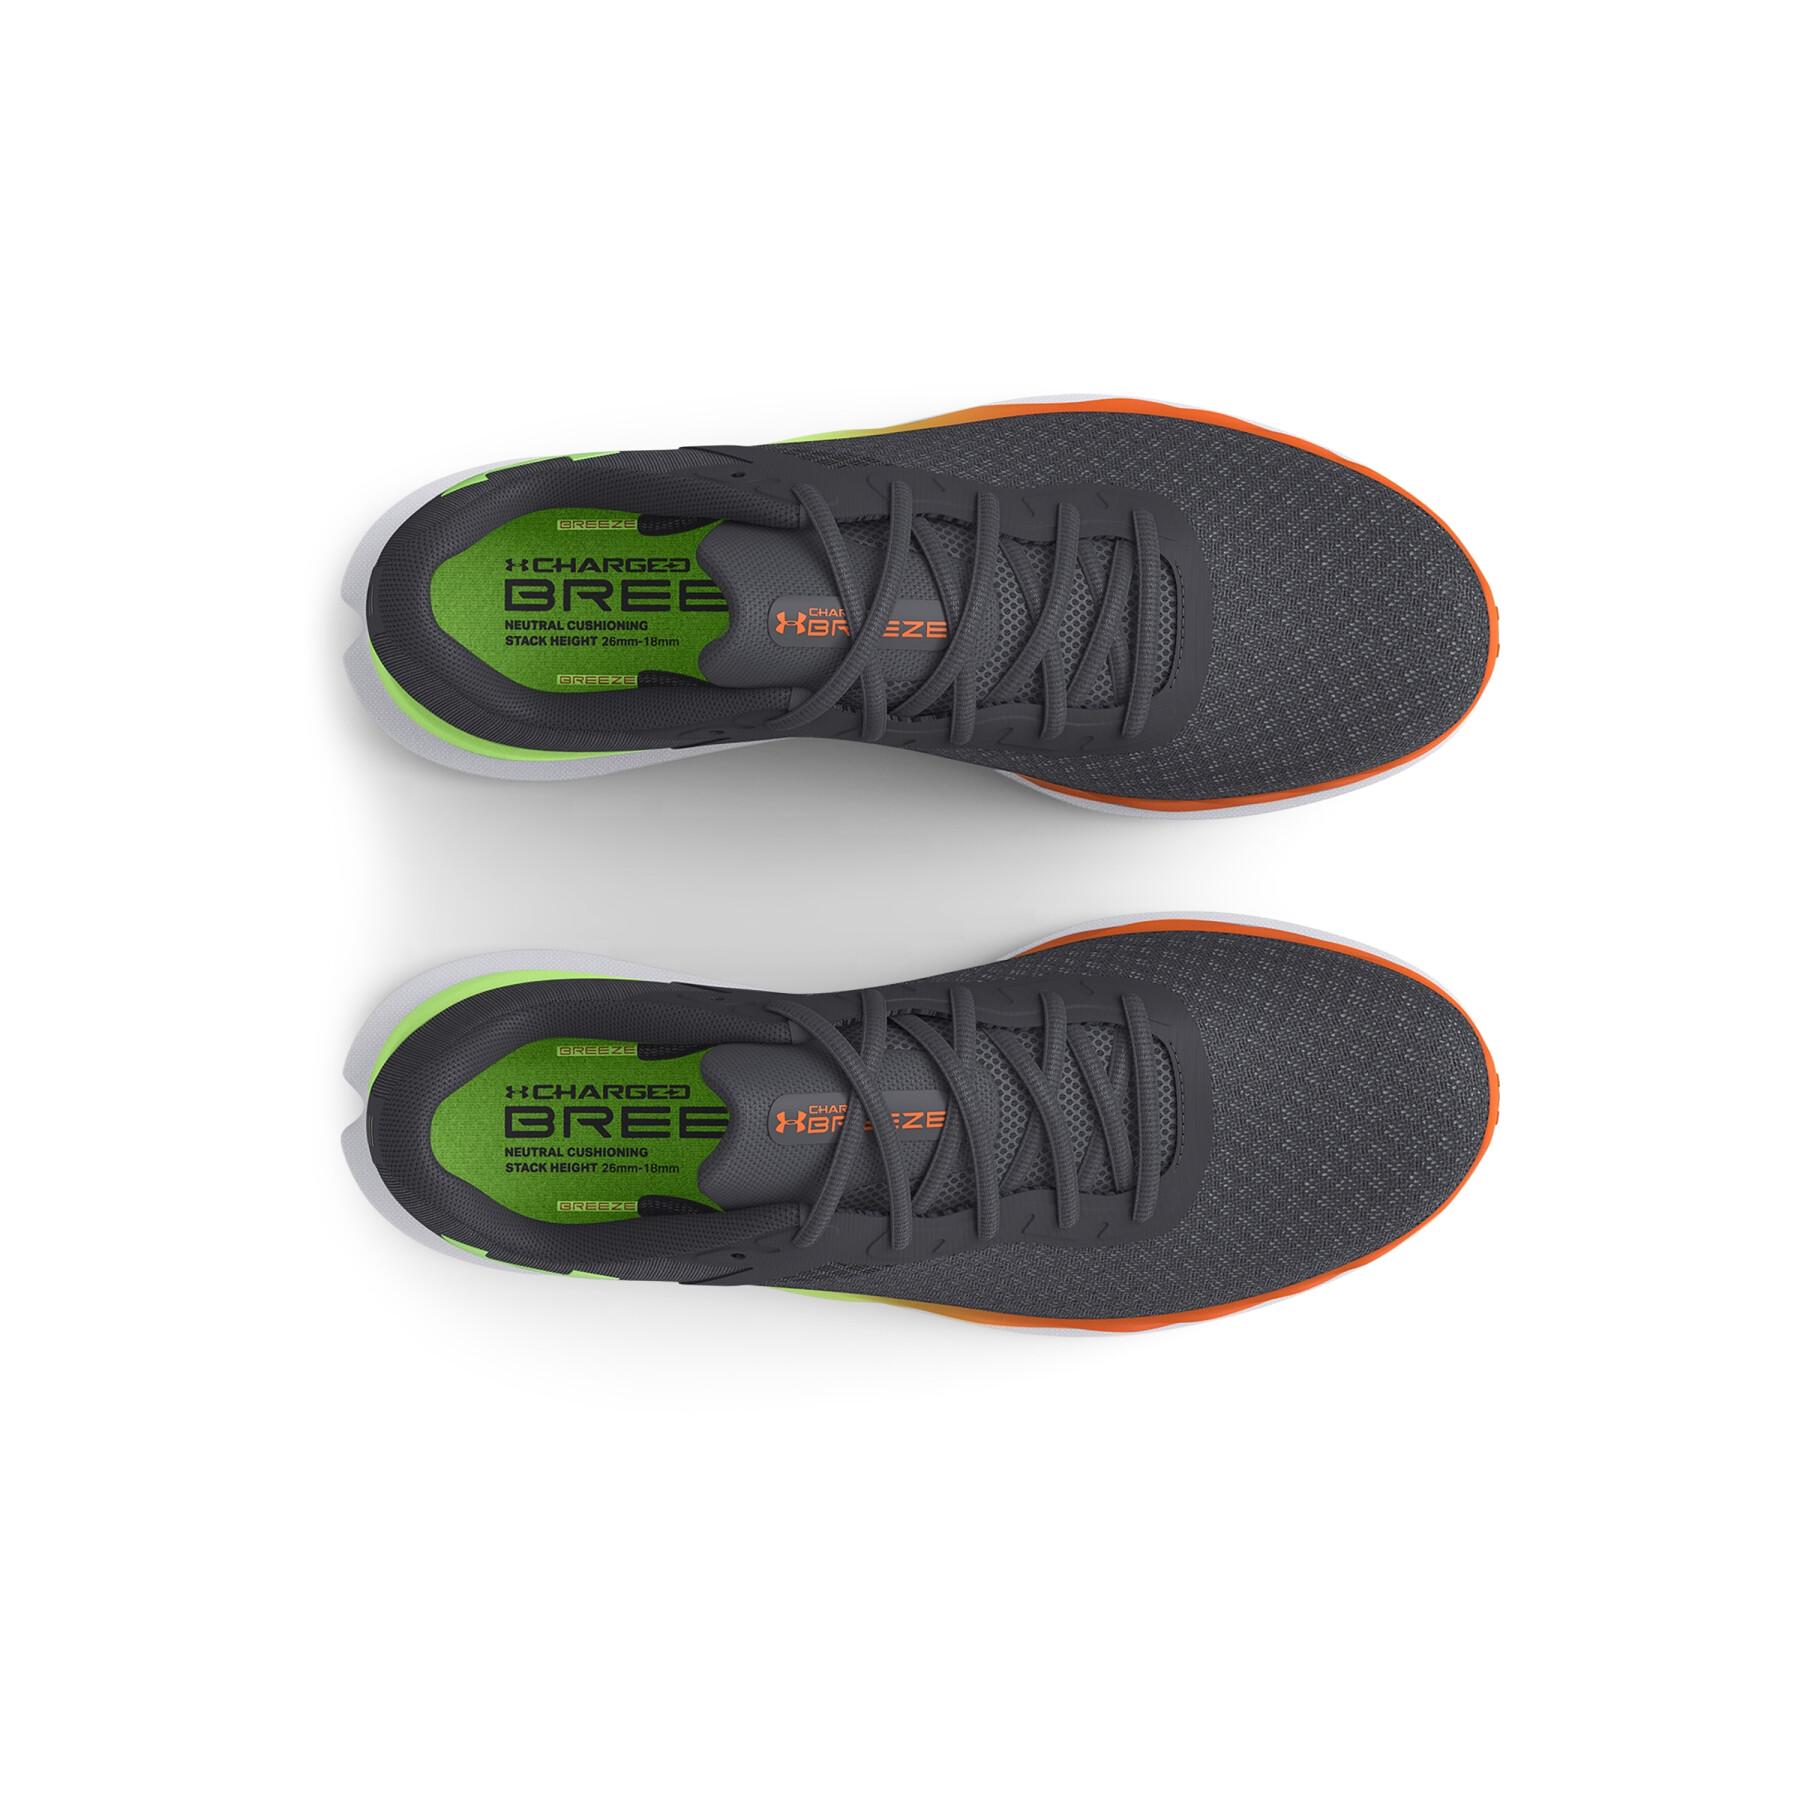 Chaussures de running Under Armour Charged breeze